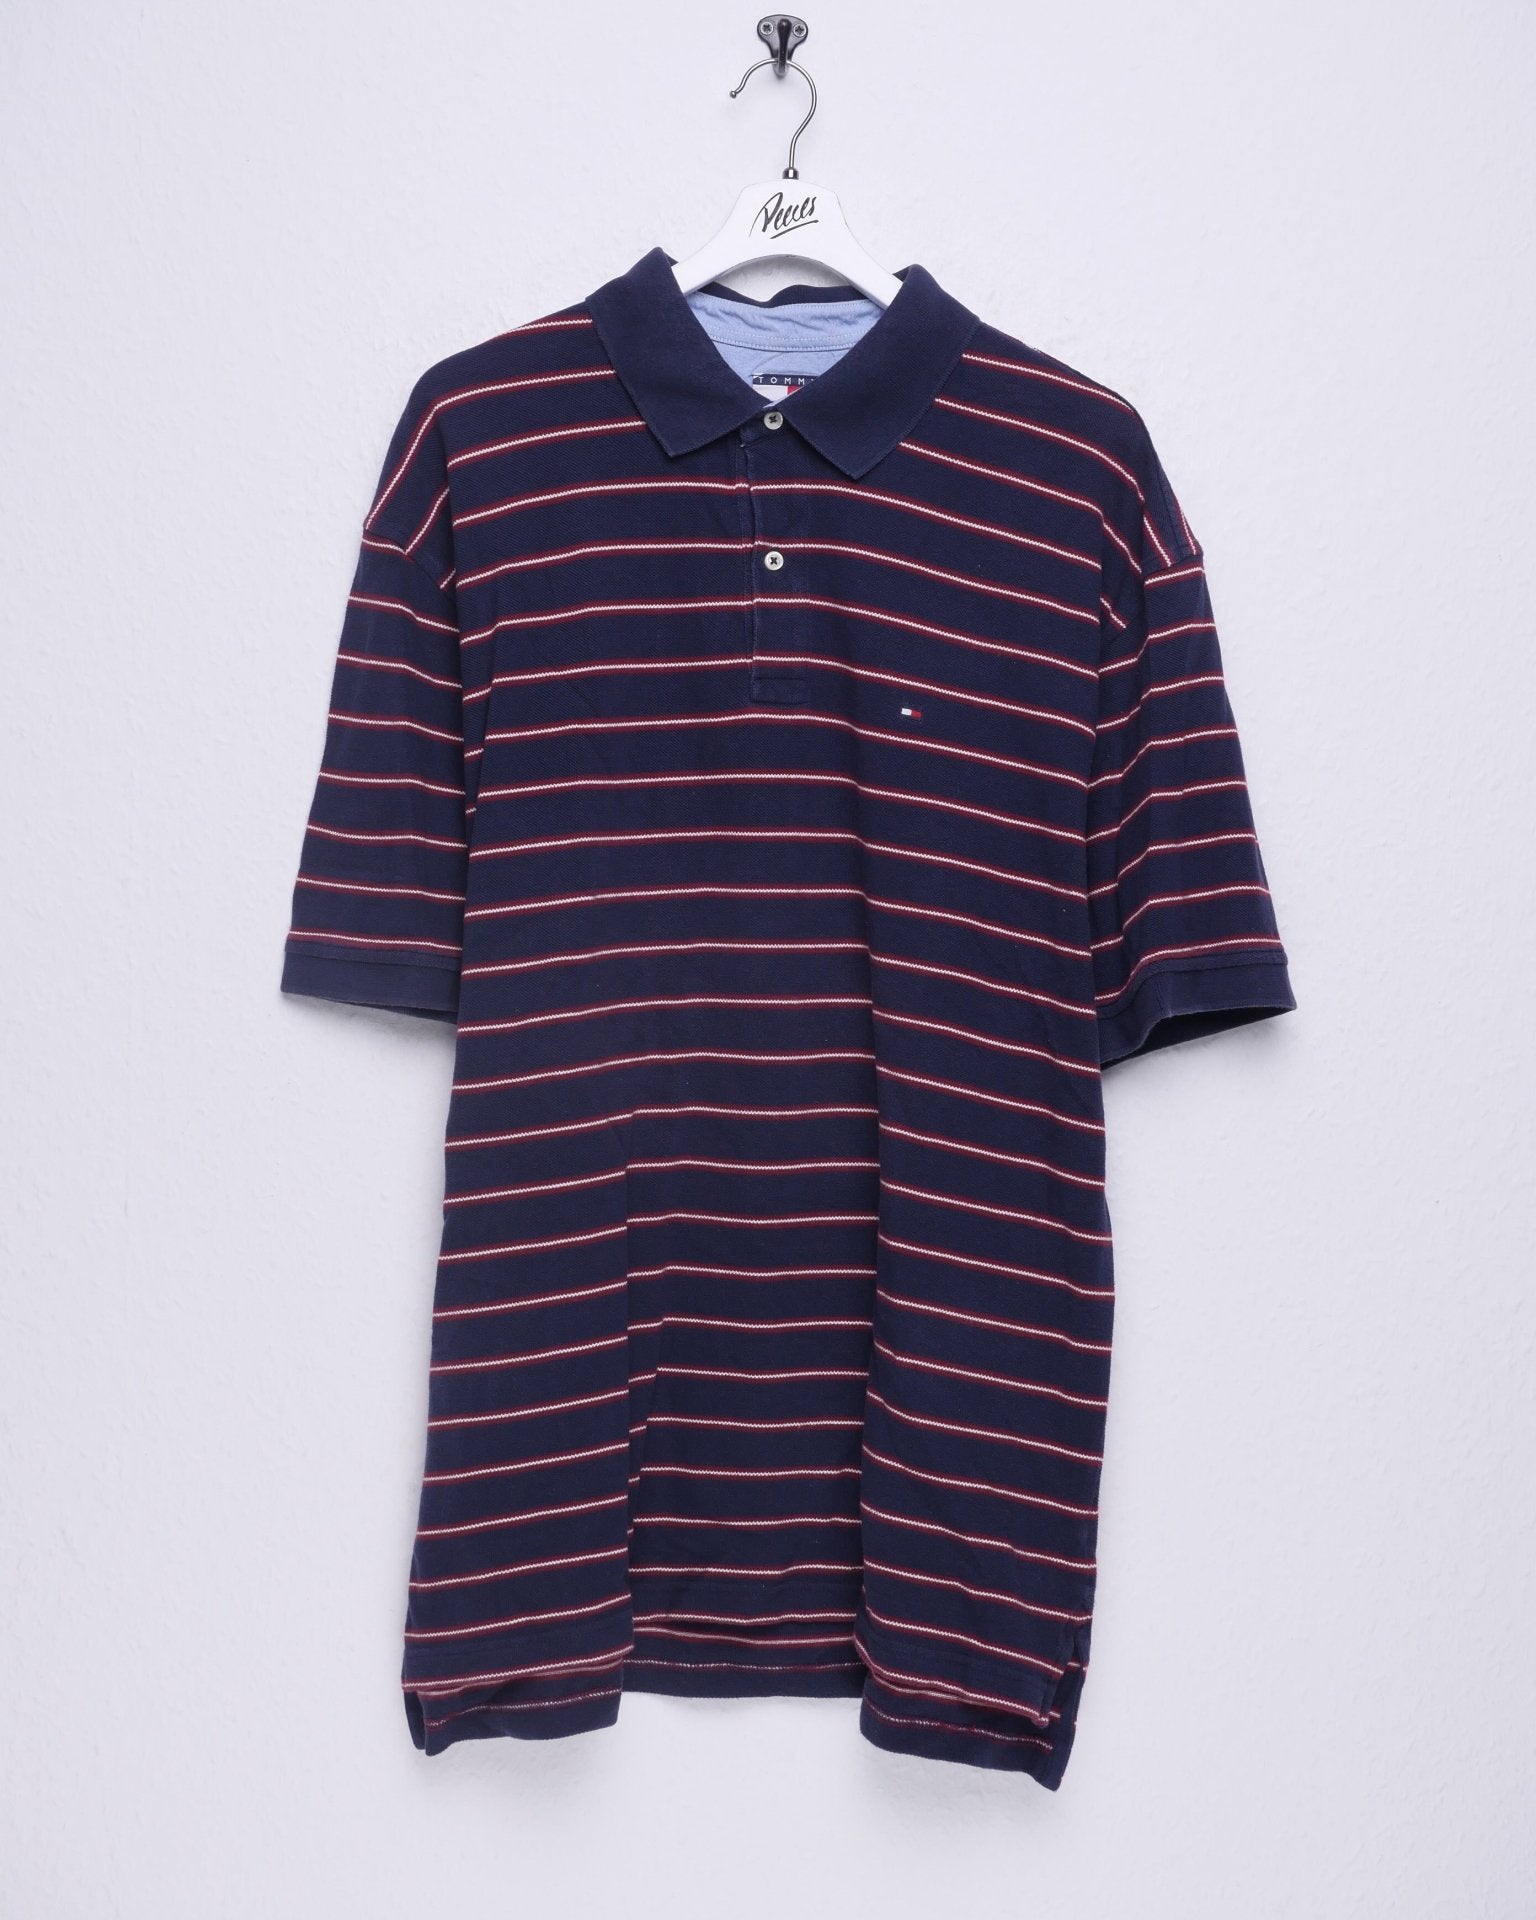 Tommy Hilfiger embroidered Logo striped navy S/S Polo Shirt - Peeces